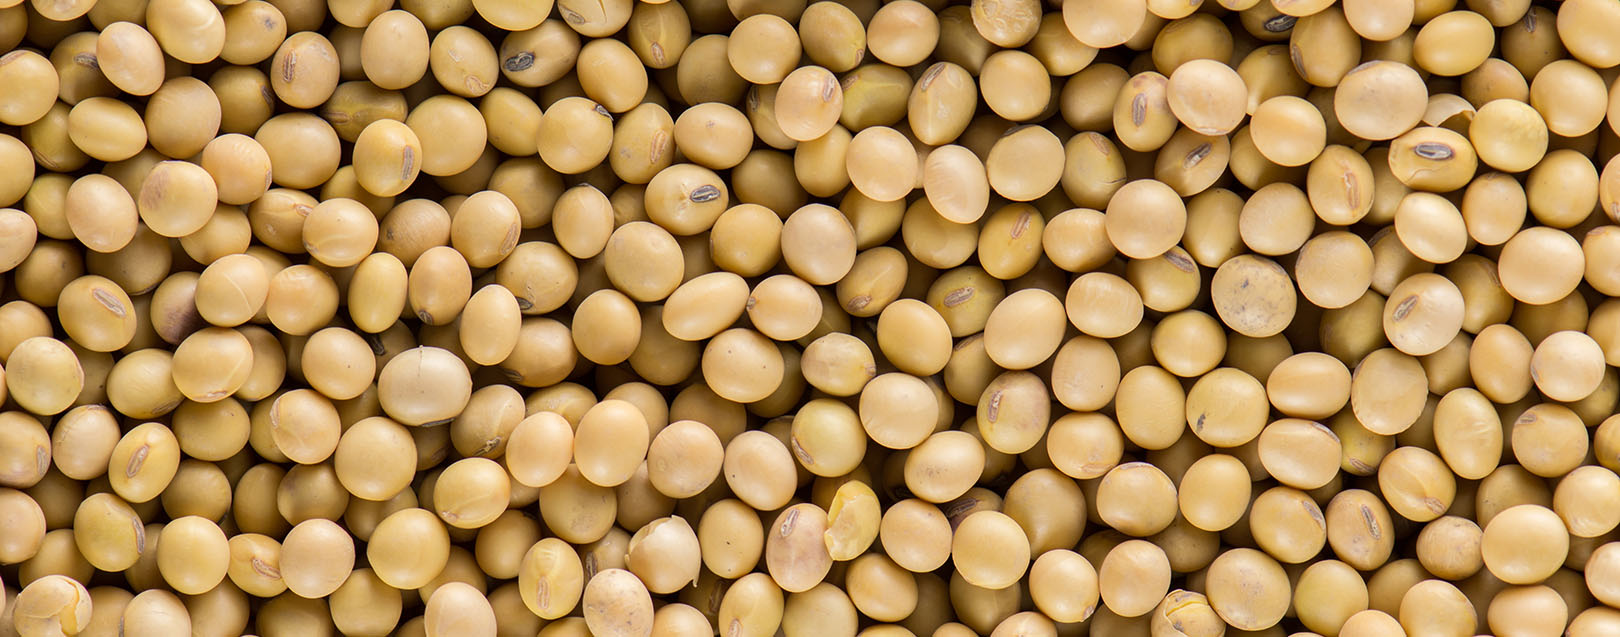 Soybean meal exports witness 735.6% rise: SOPA